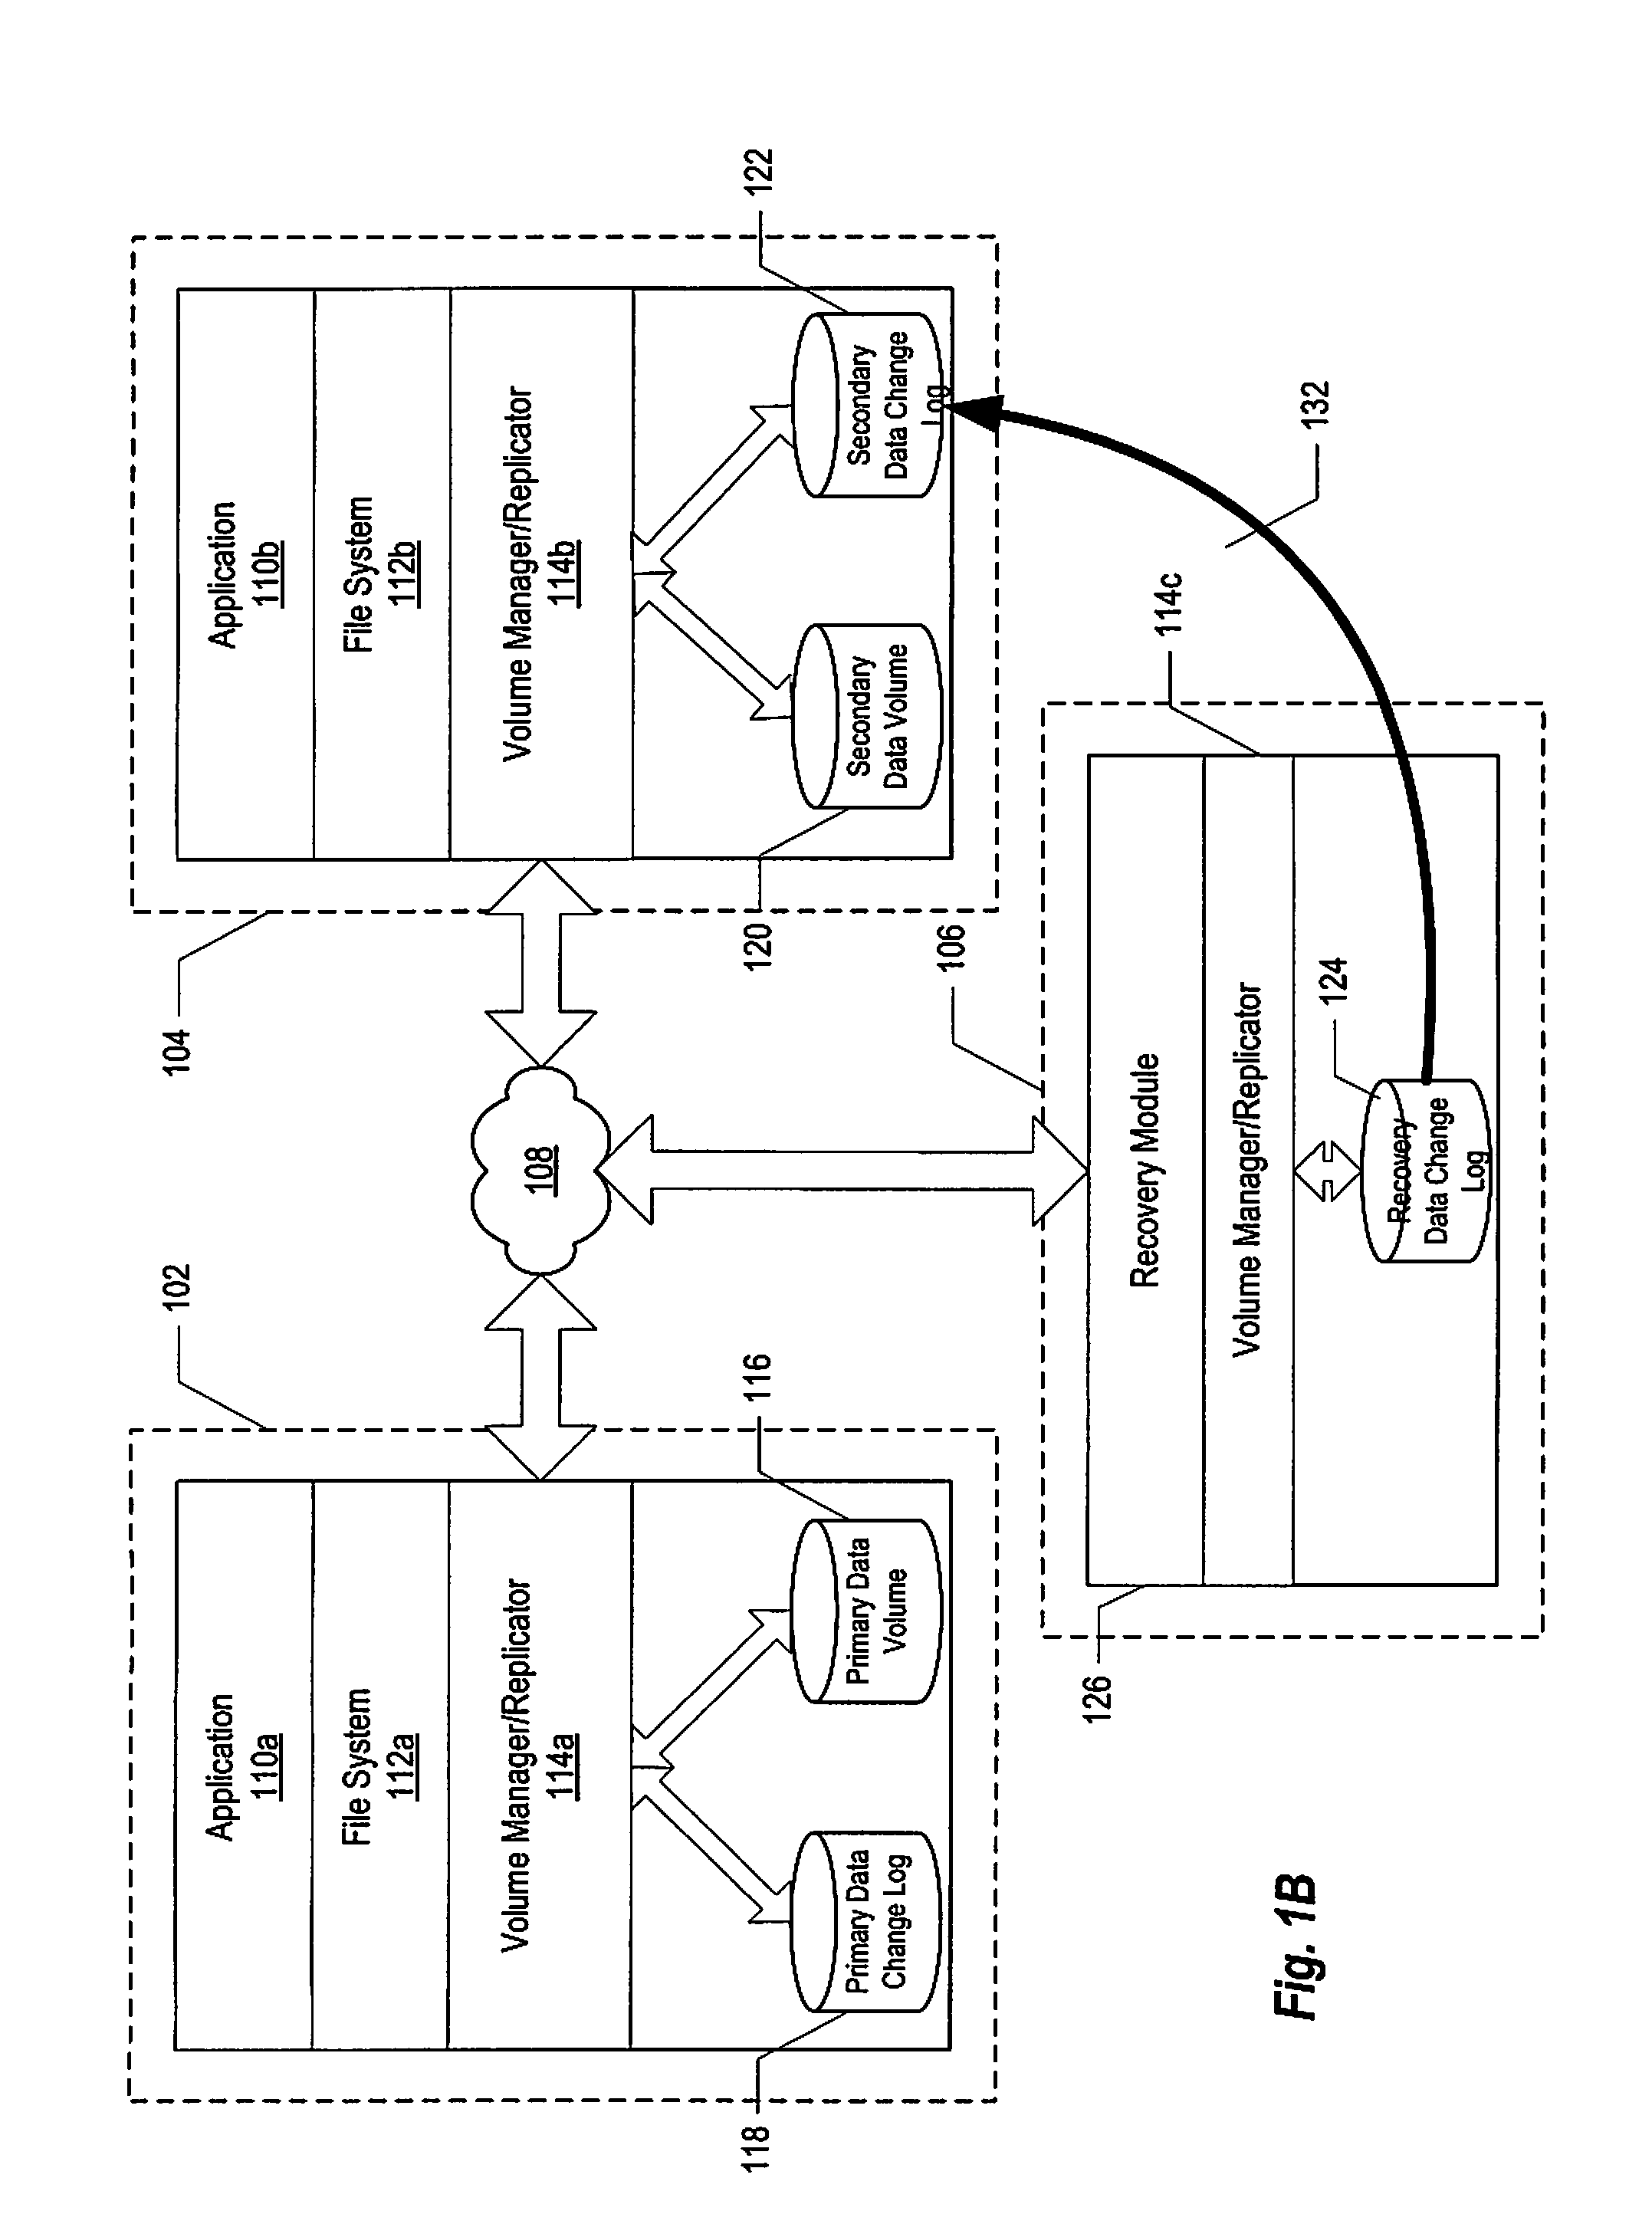 Method and system of replicating data using a recovery data change log